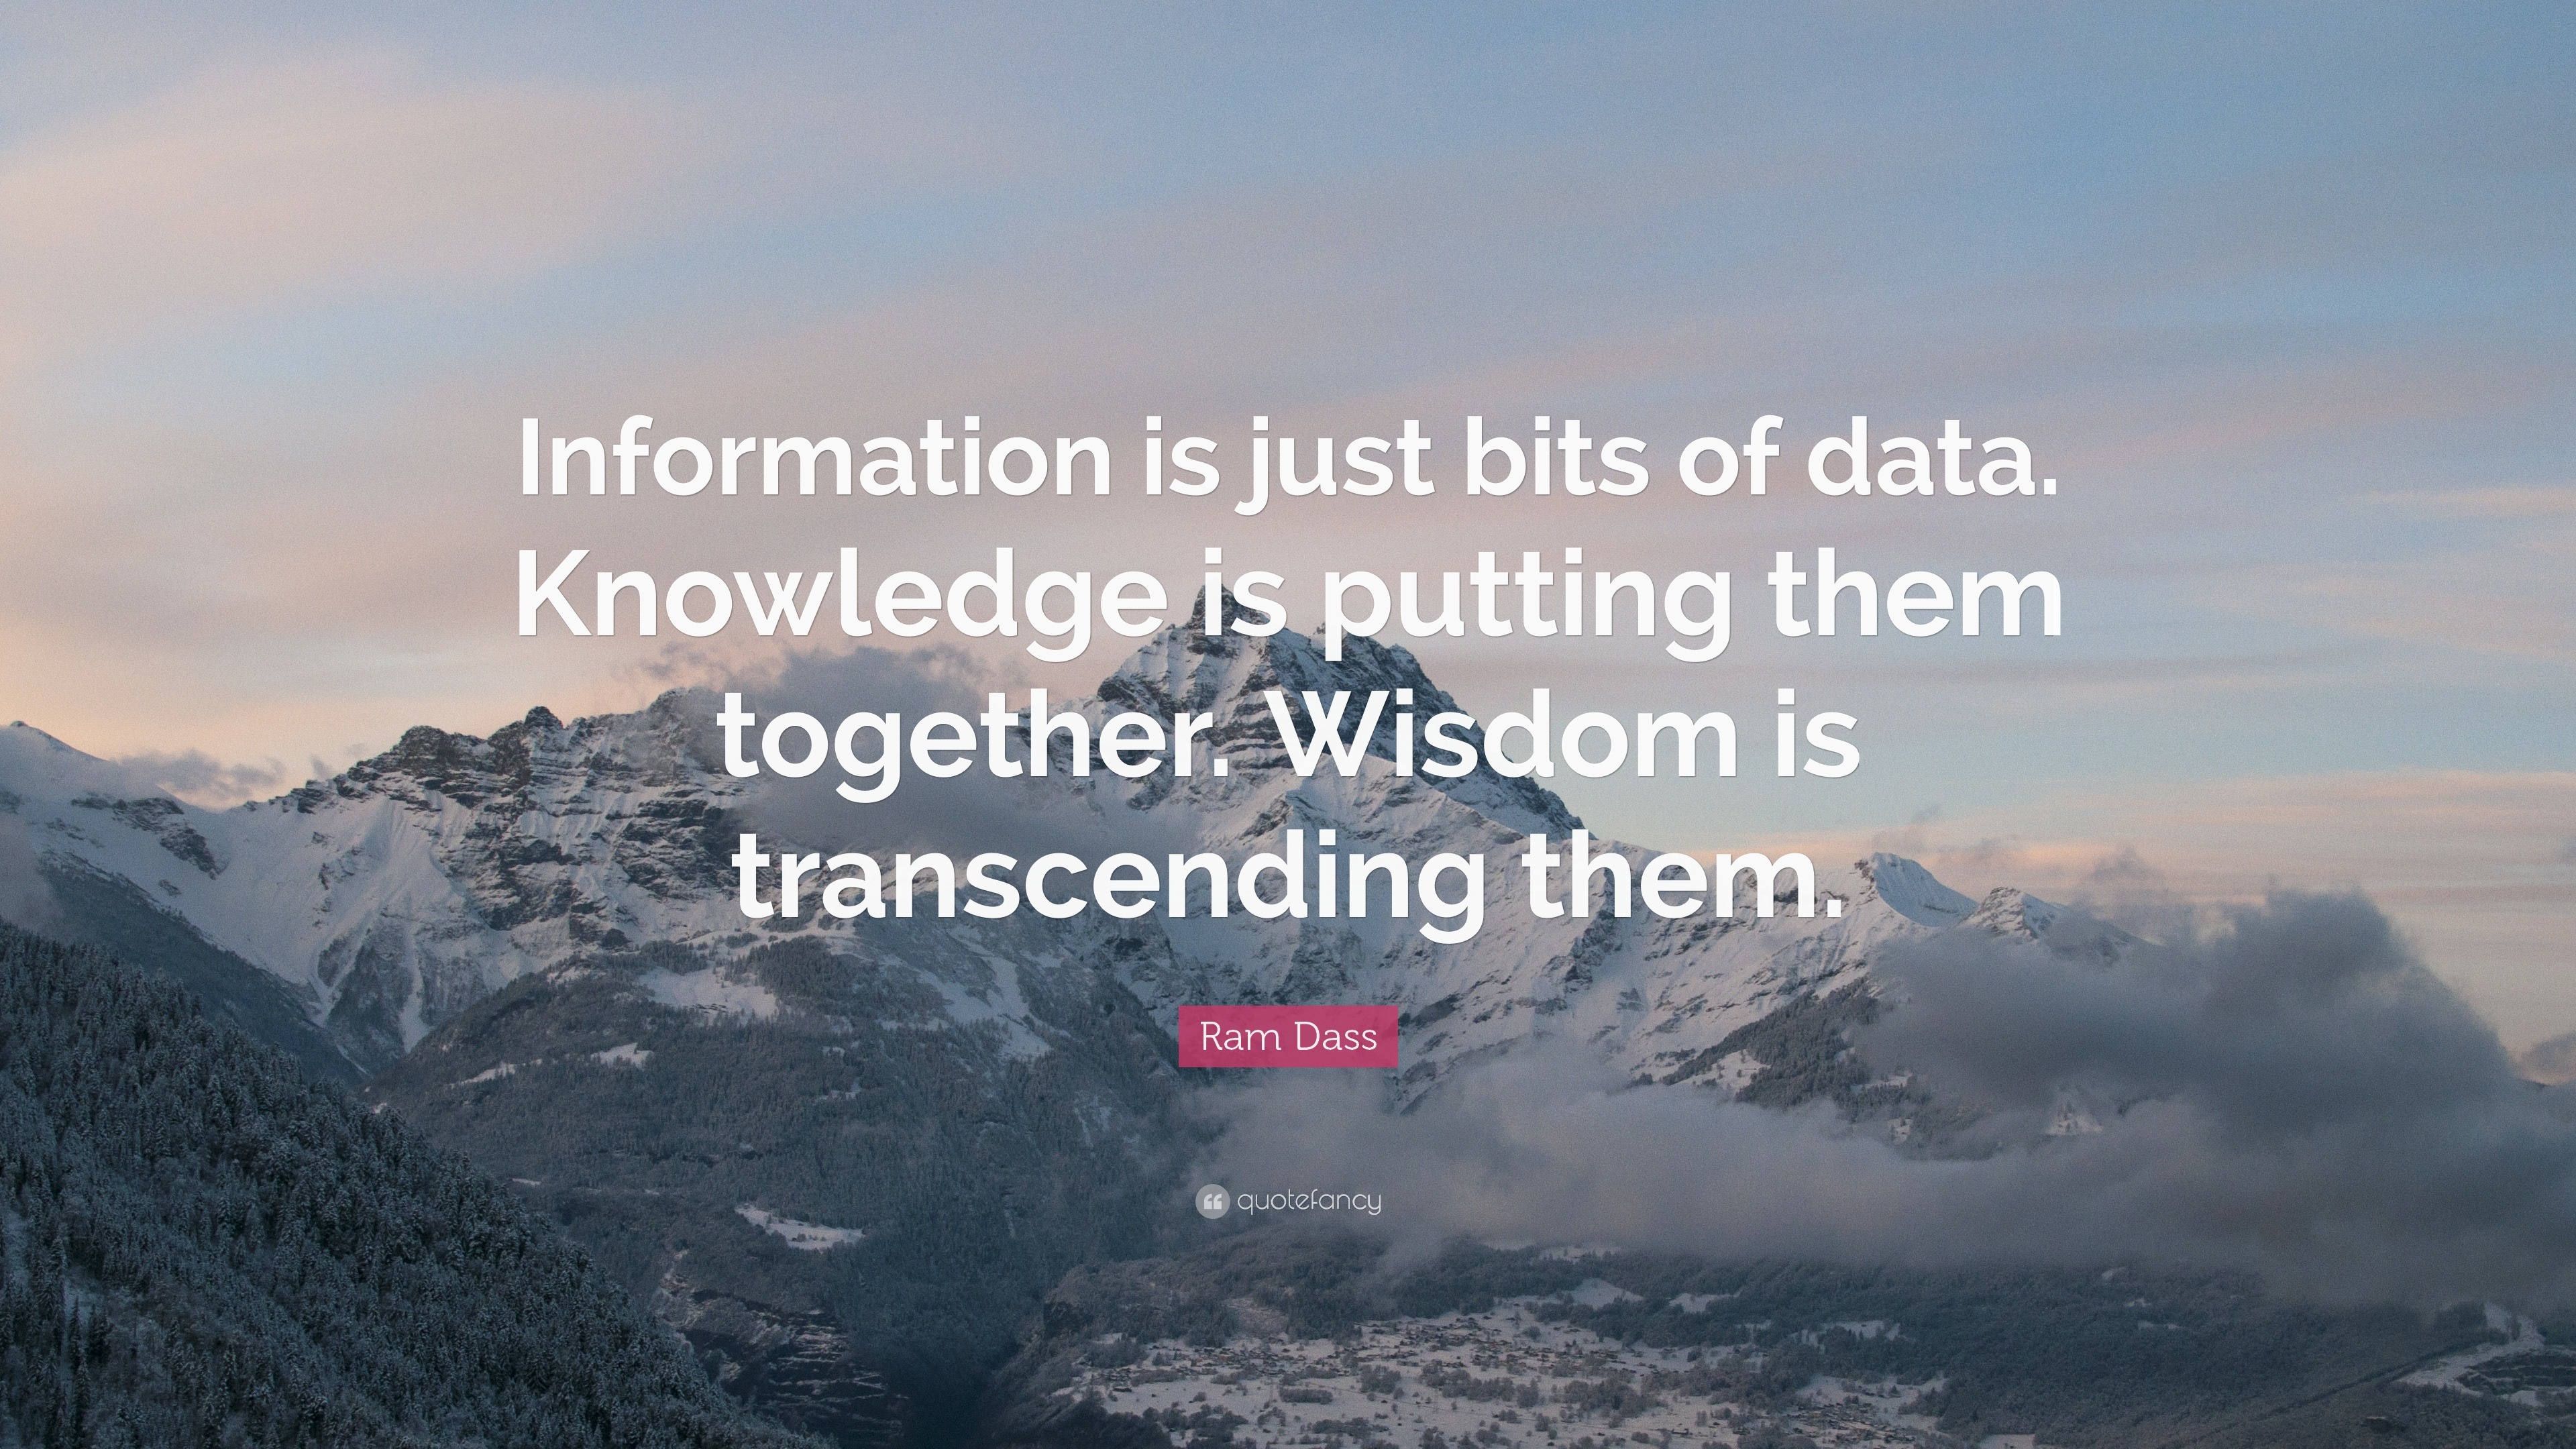 Ram Dass Quote: “Information is just bits of data. Knowledge is putting